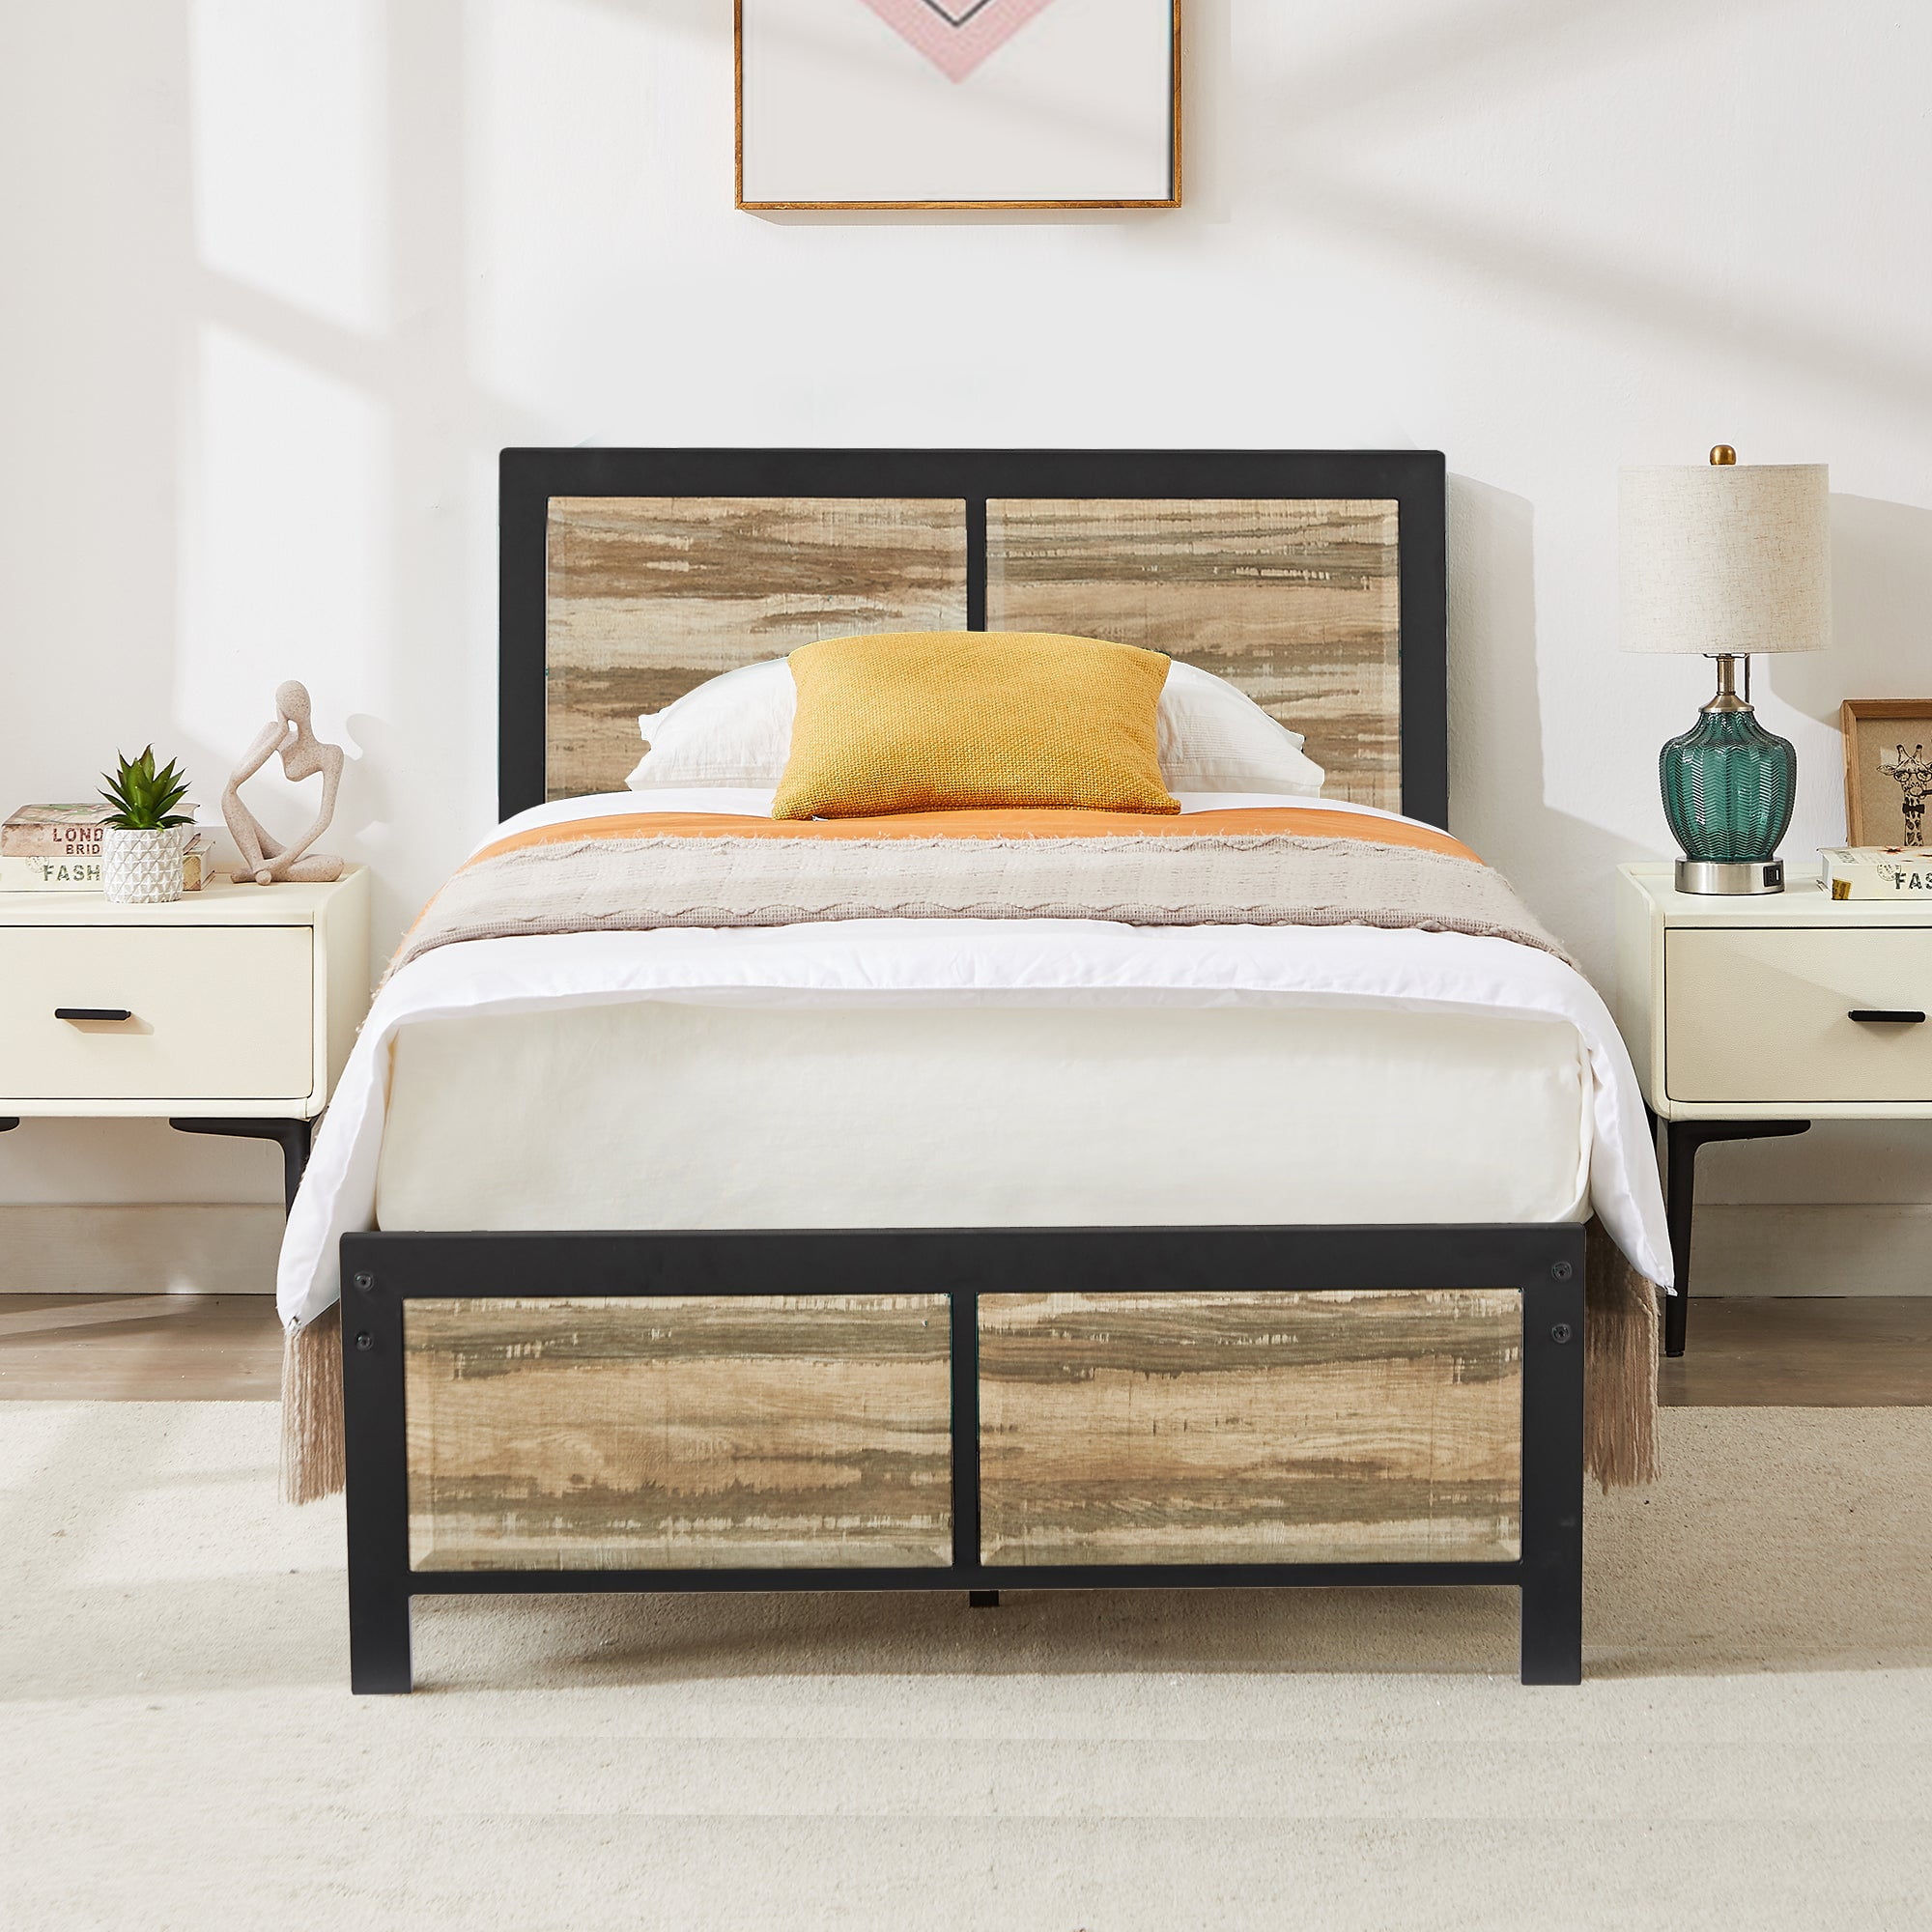 VECELO Twin Size Metal Platform Bed Frame with Wooden Headboard